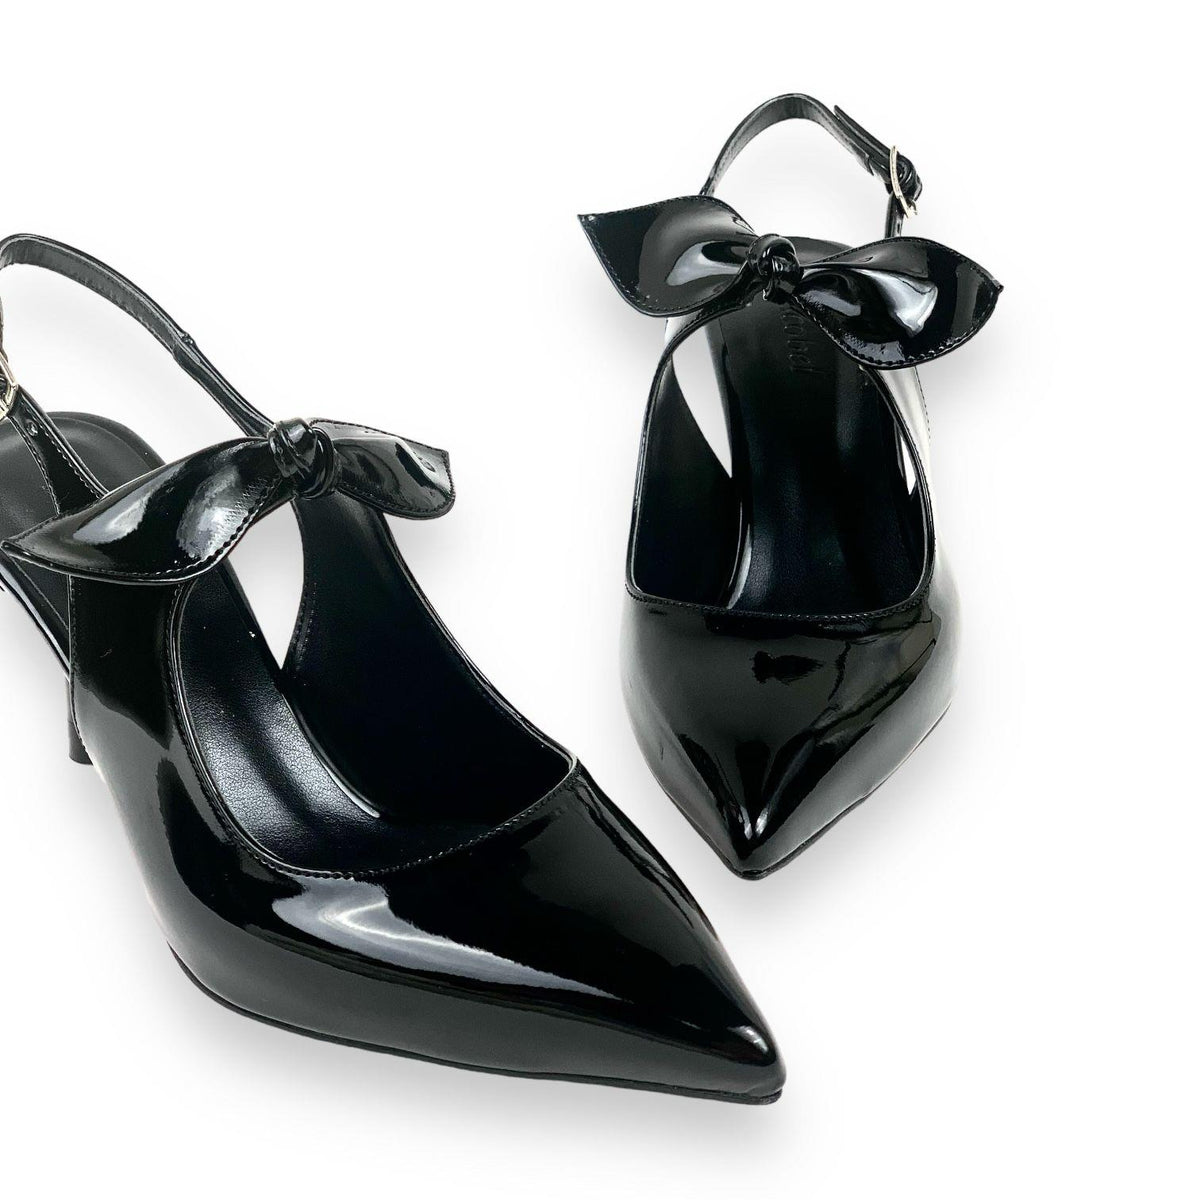 Women's Black Patent Leather Material Tanb Bow Detailed Heeled Pointed Toe Shoes 7 cm Heel - STREETMODE ™